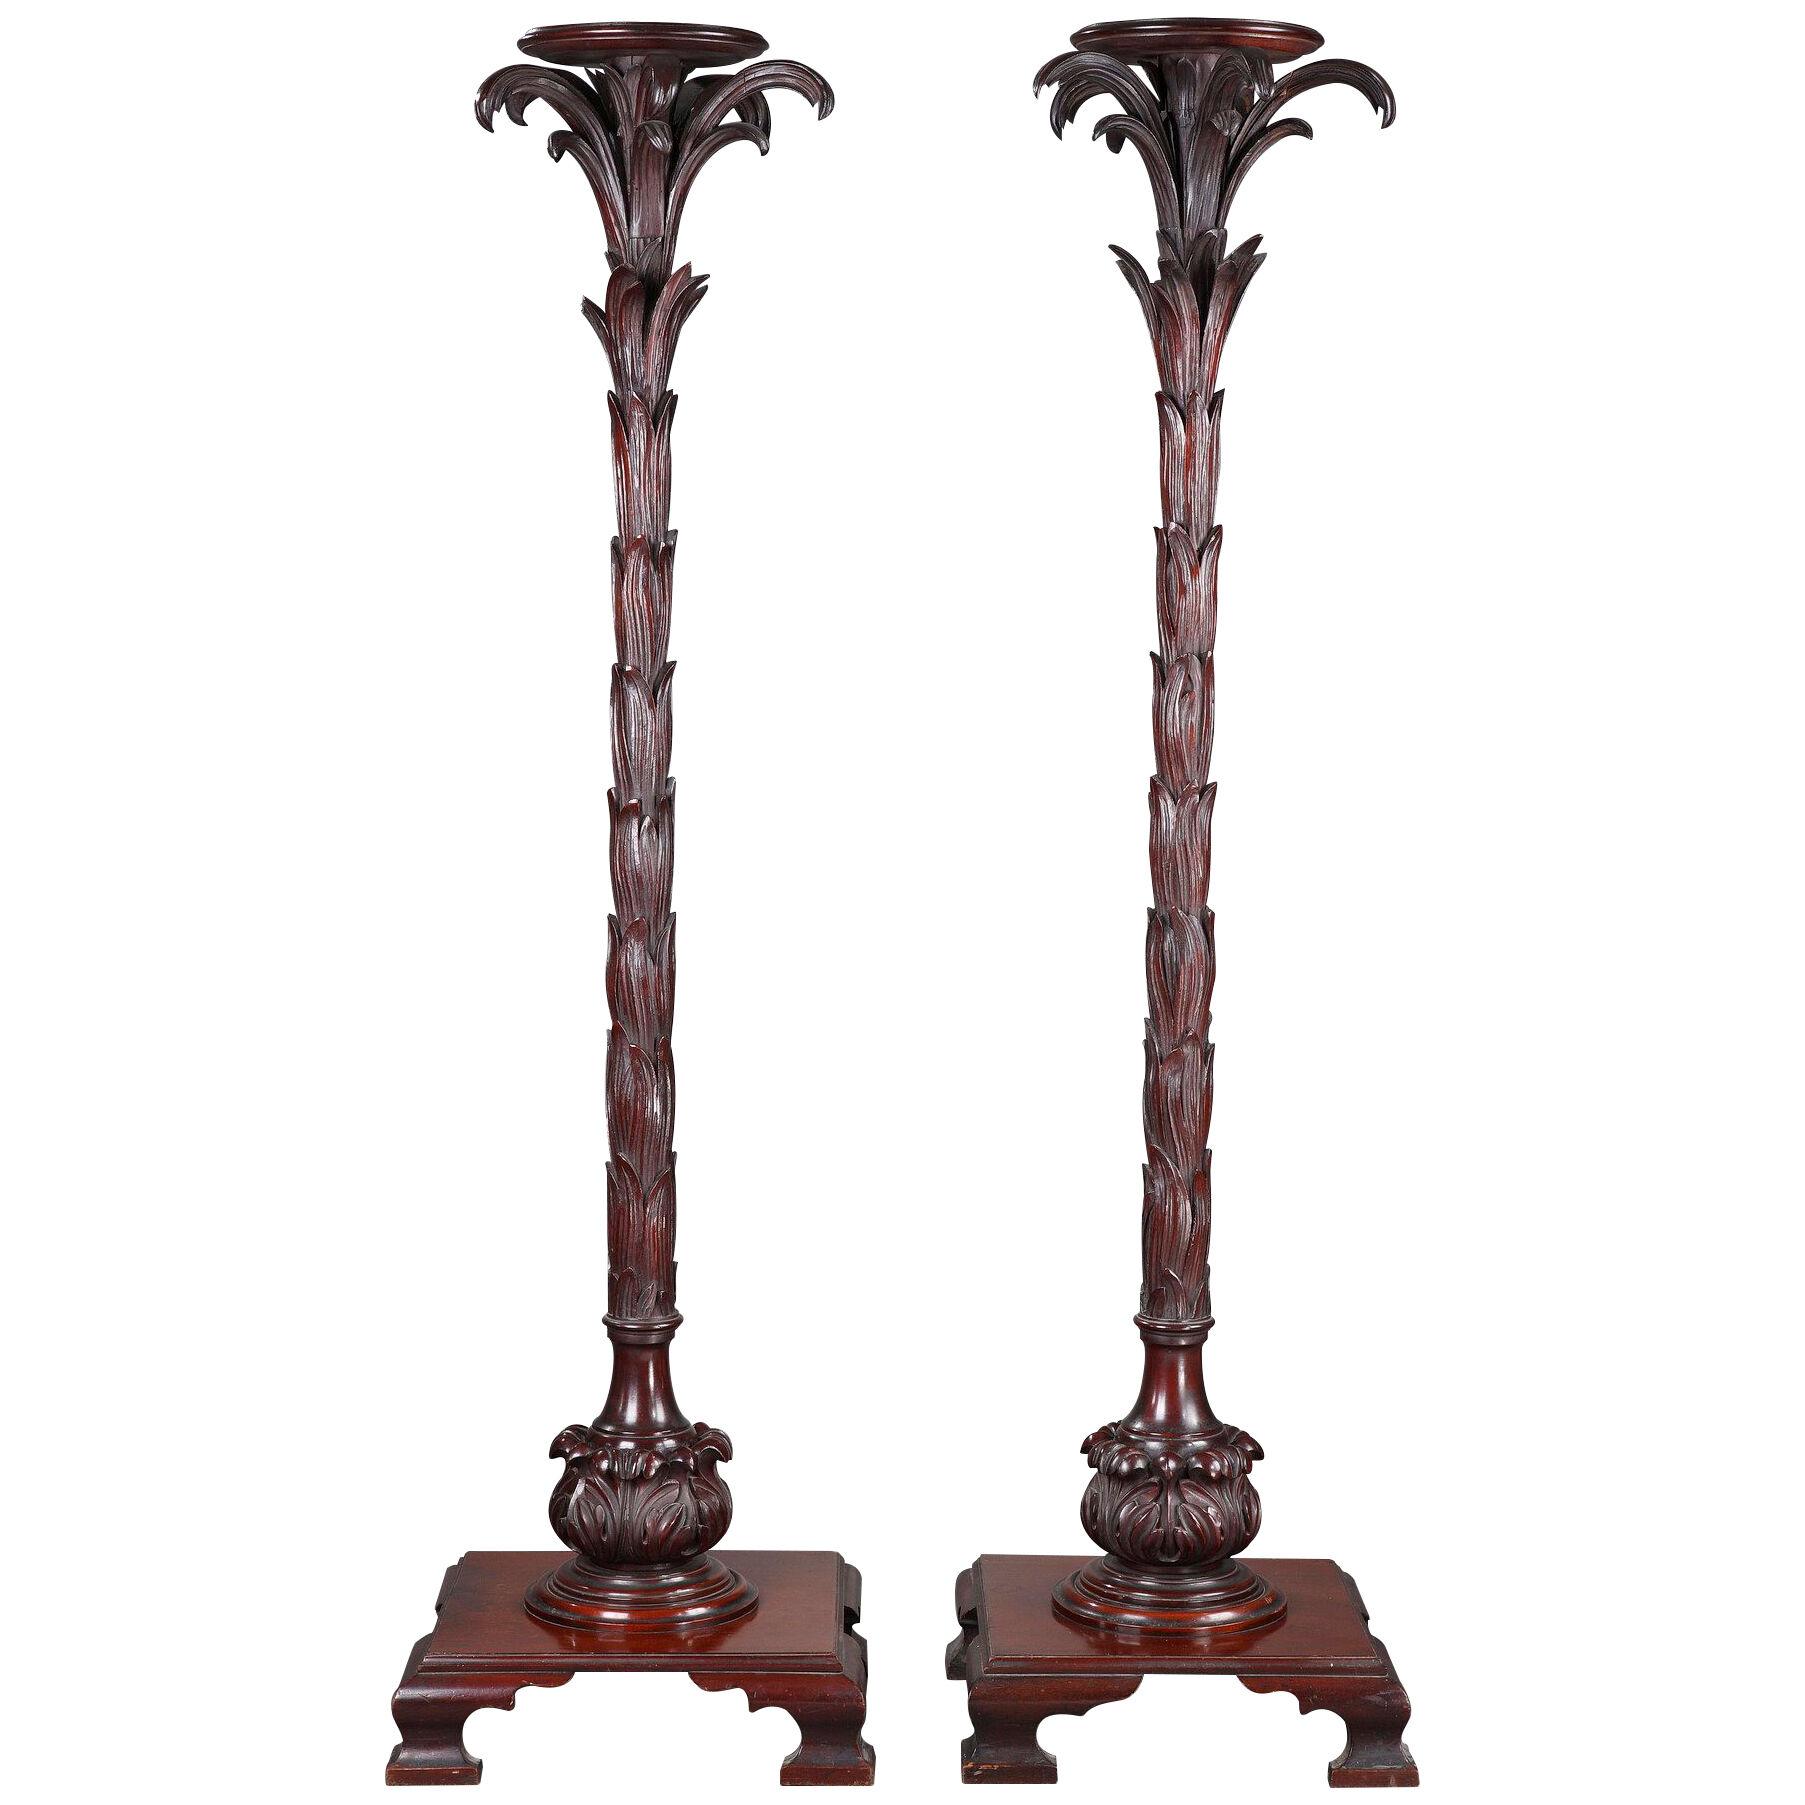 Pair of "Palmtree" Shaped Stands, England, Circa 1880